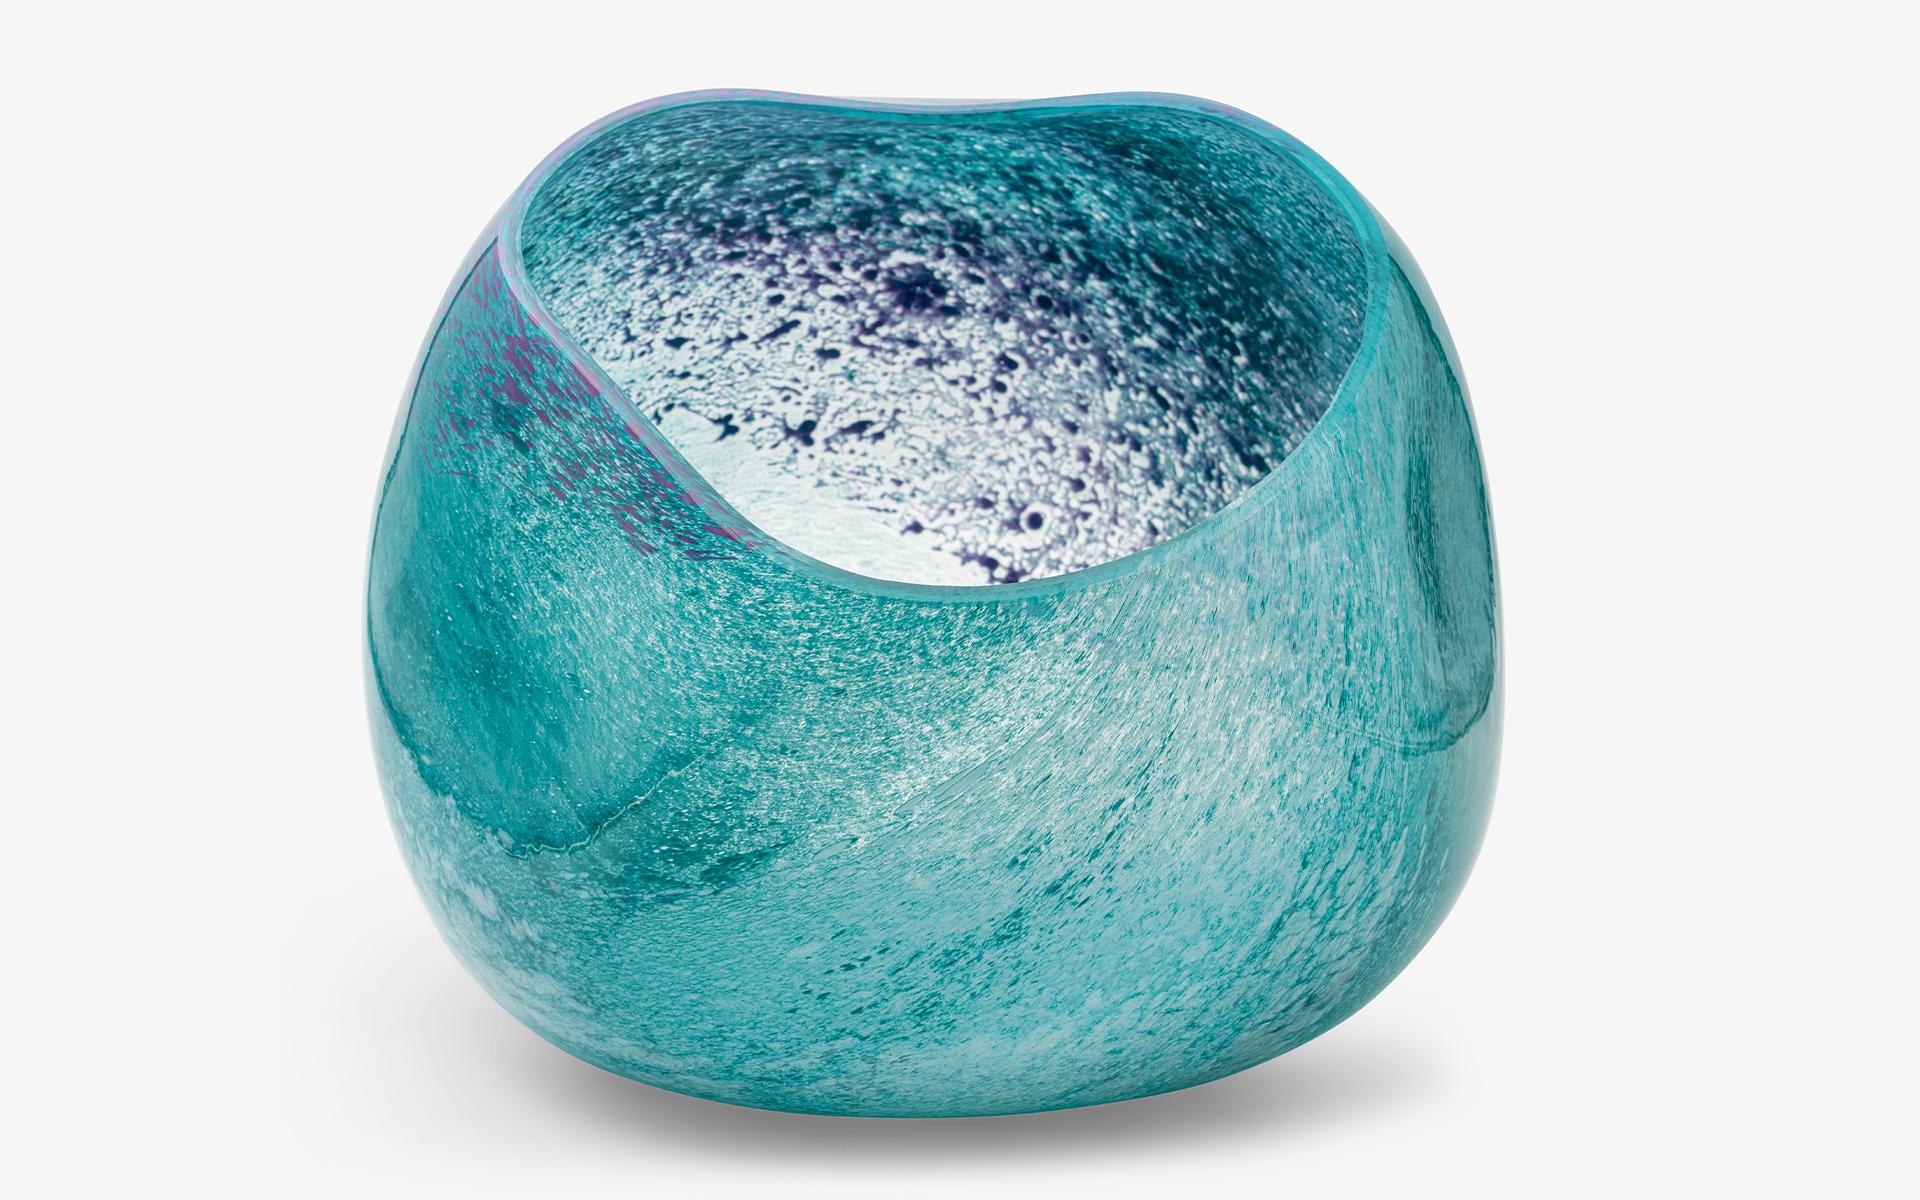 Organic Modern Turquoise and Lilac Color Amorphous Blown Glass Vase No:2